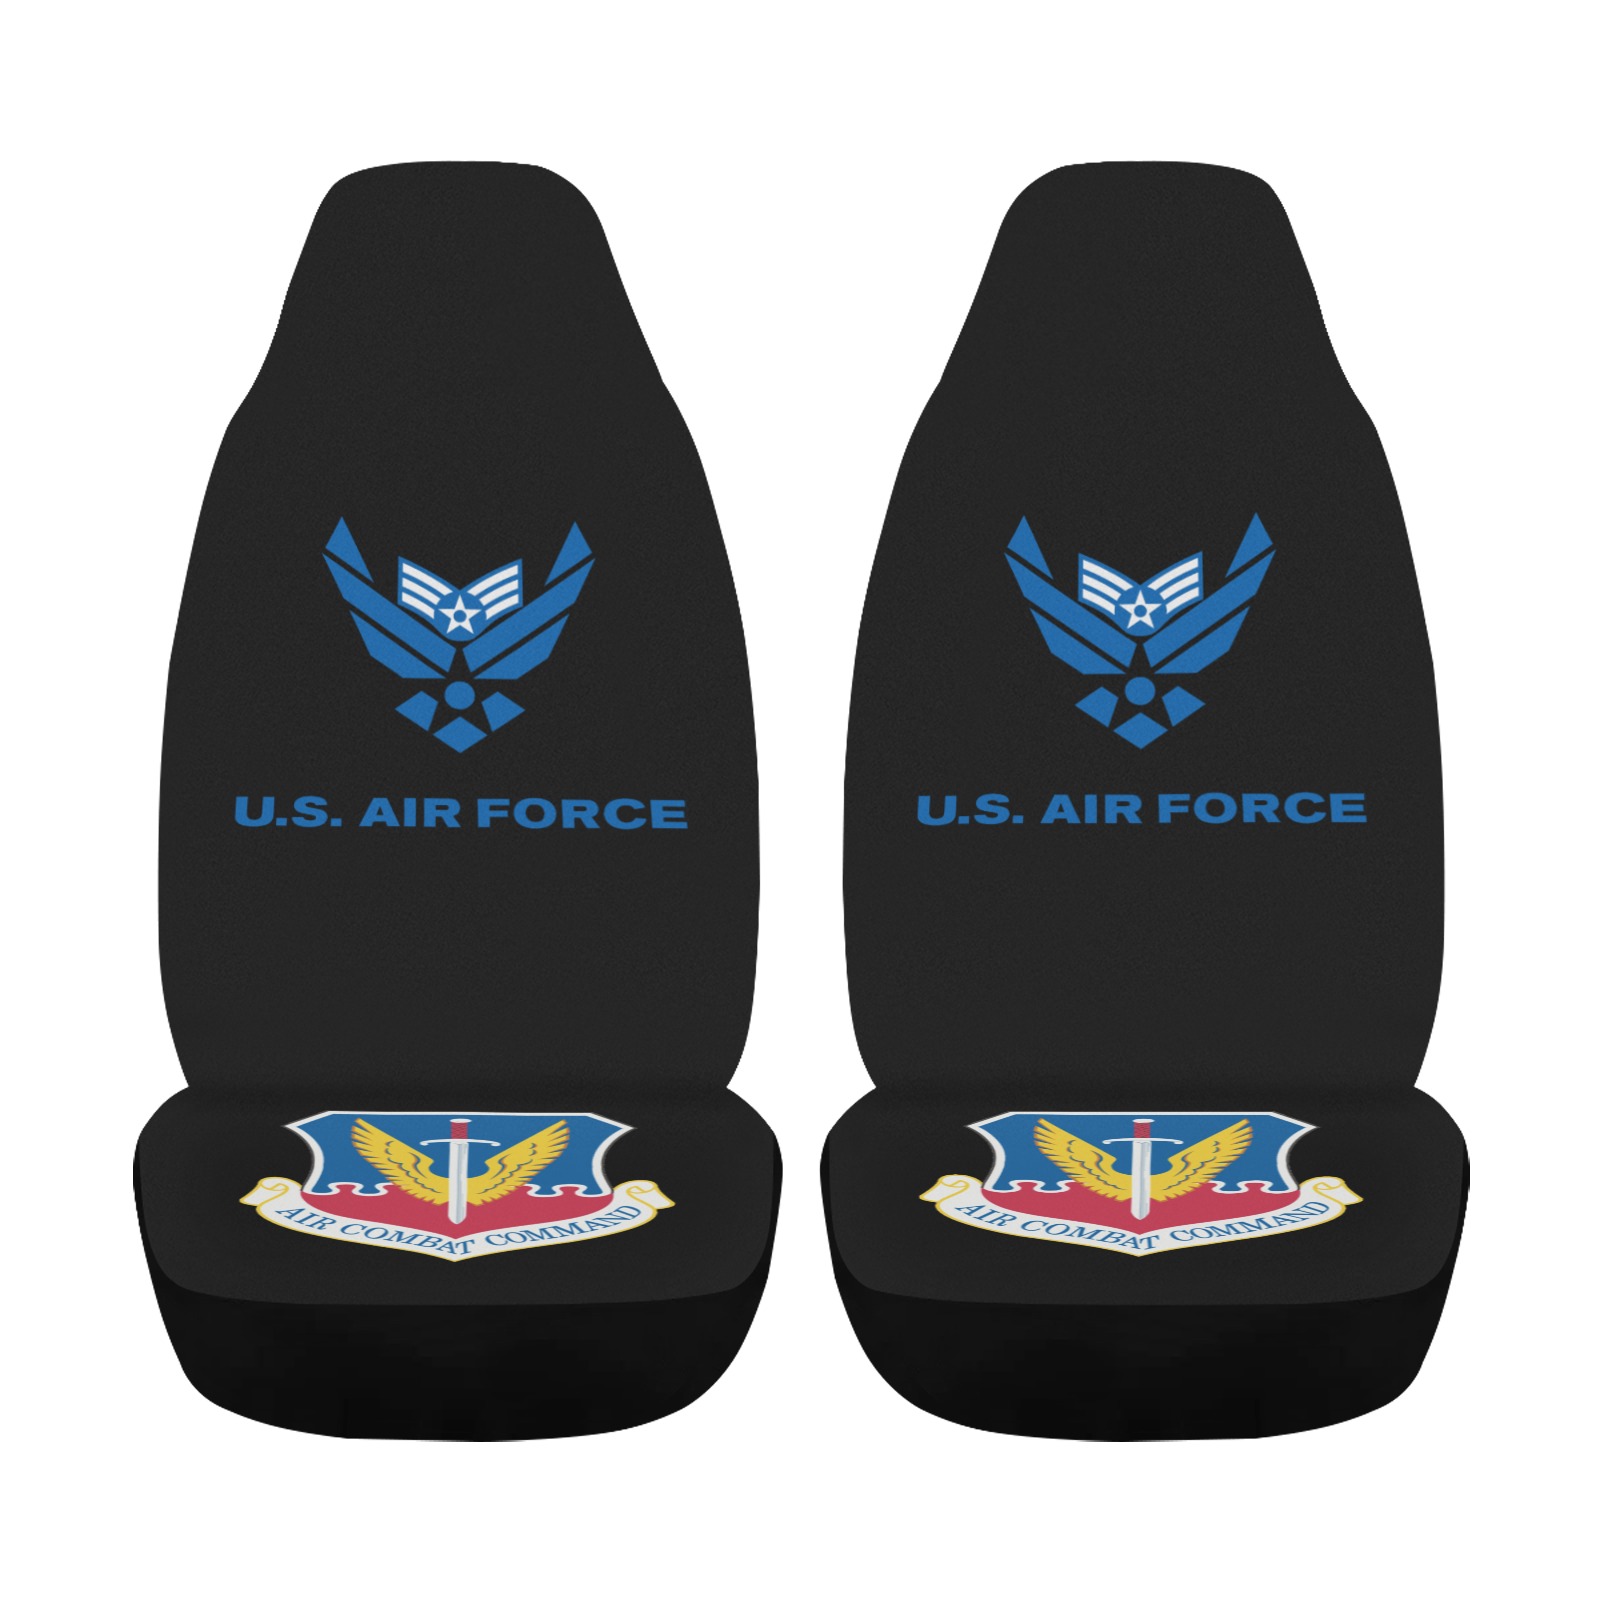 Senior Airman Offutt Air Force Base Car Seat Cover Airbag Compatible (Set of 2)